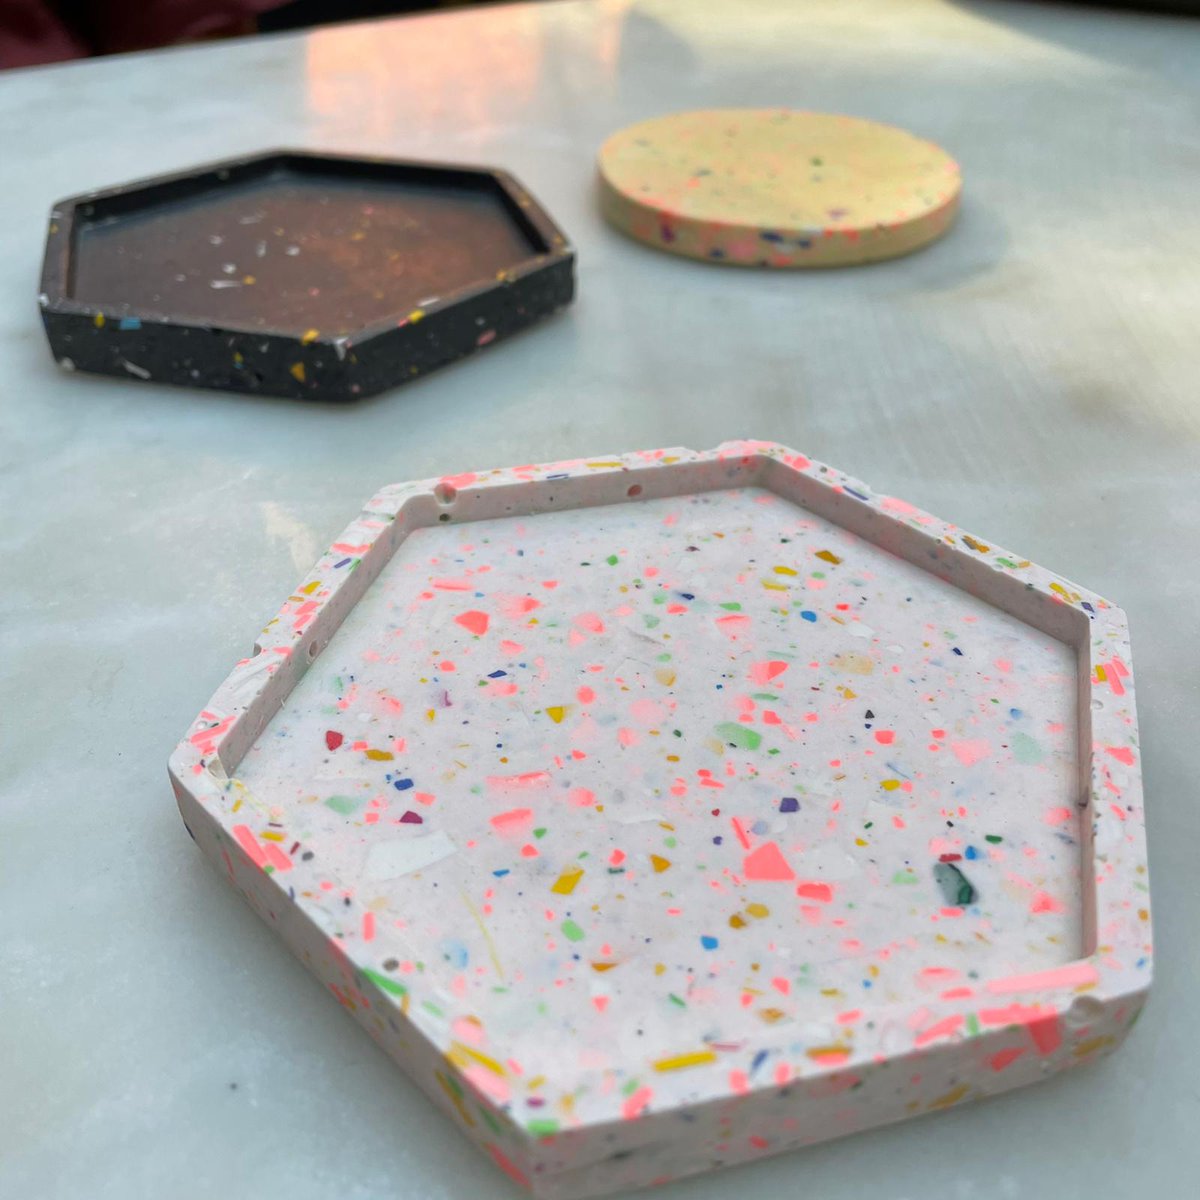 We took a break from the studio for a few hours yesterday to do a terrazzo workshop with @jillandgill. A real treat to get away from screens and get our hands dirty making these coasters. We can't recommend it highly enough. eventbrite.com/e/terrazzo-coa…